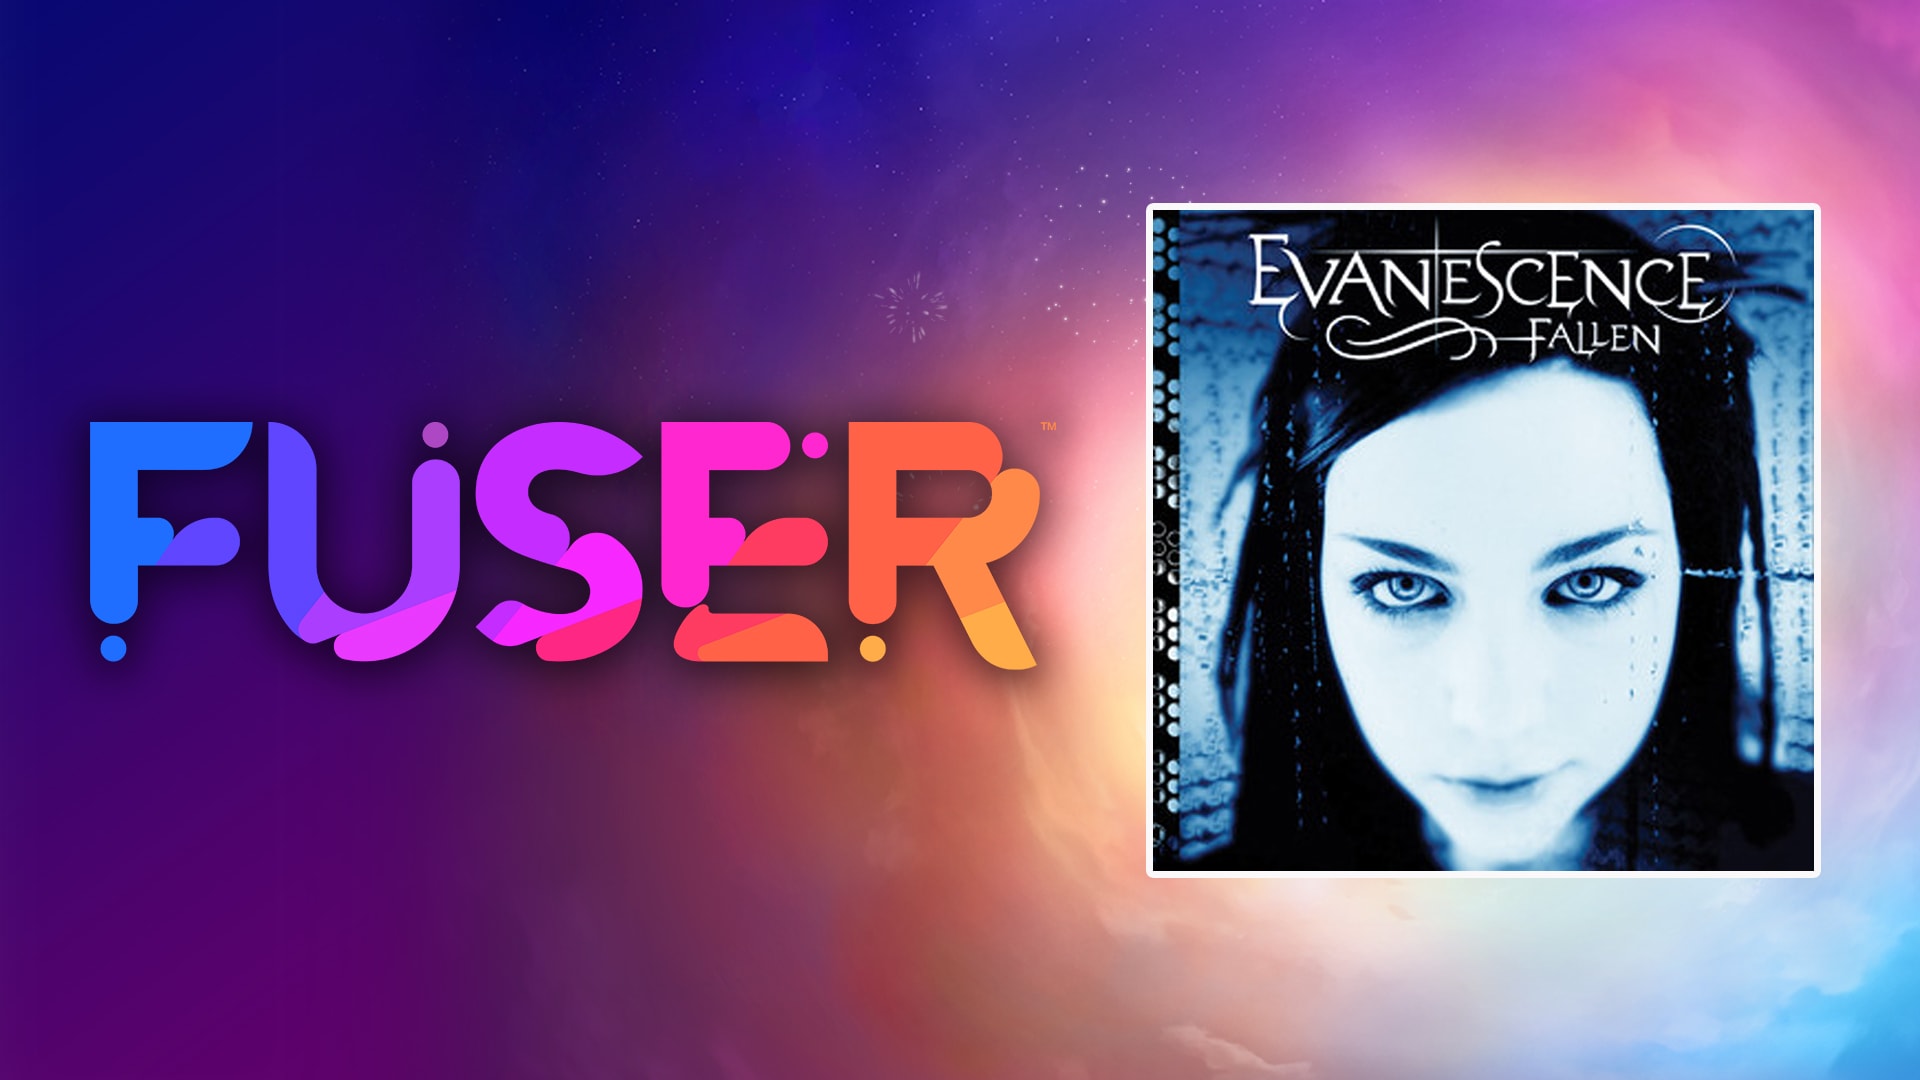 Evanescence - "Bring Me To Life"